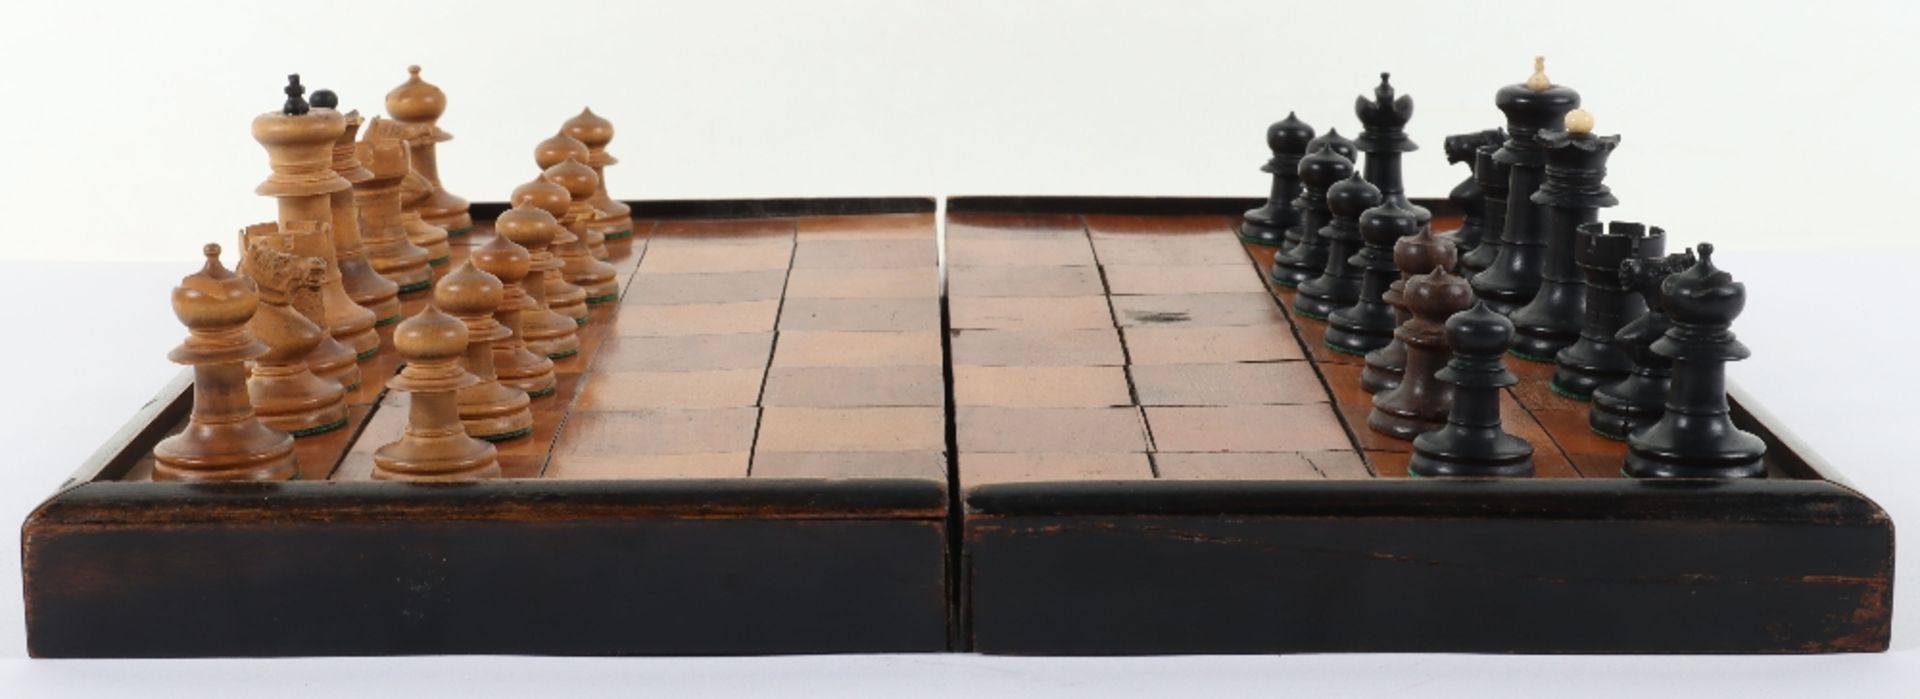 A late 19th/early 20th century chess set